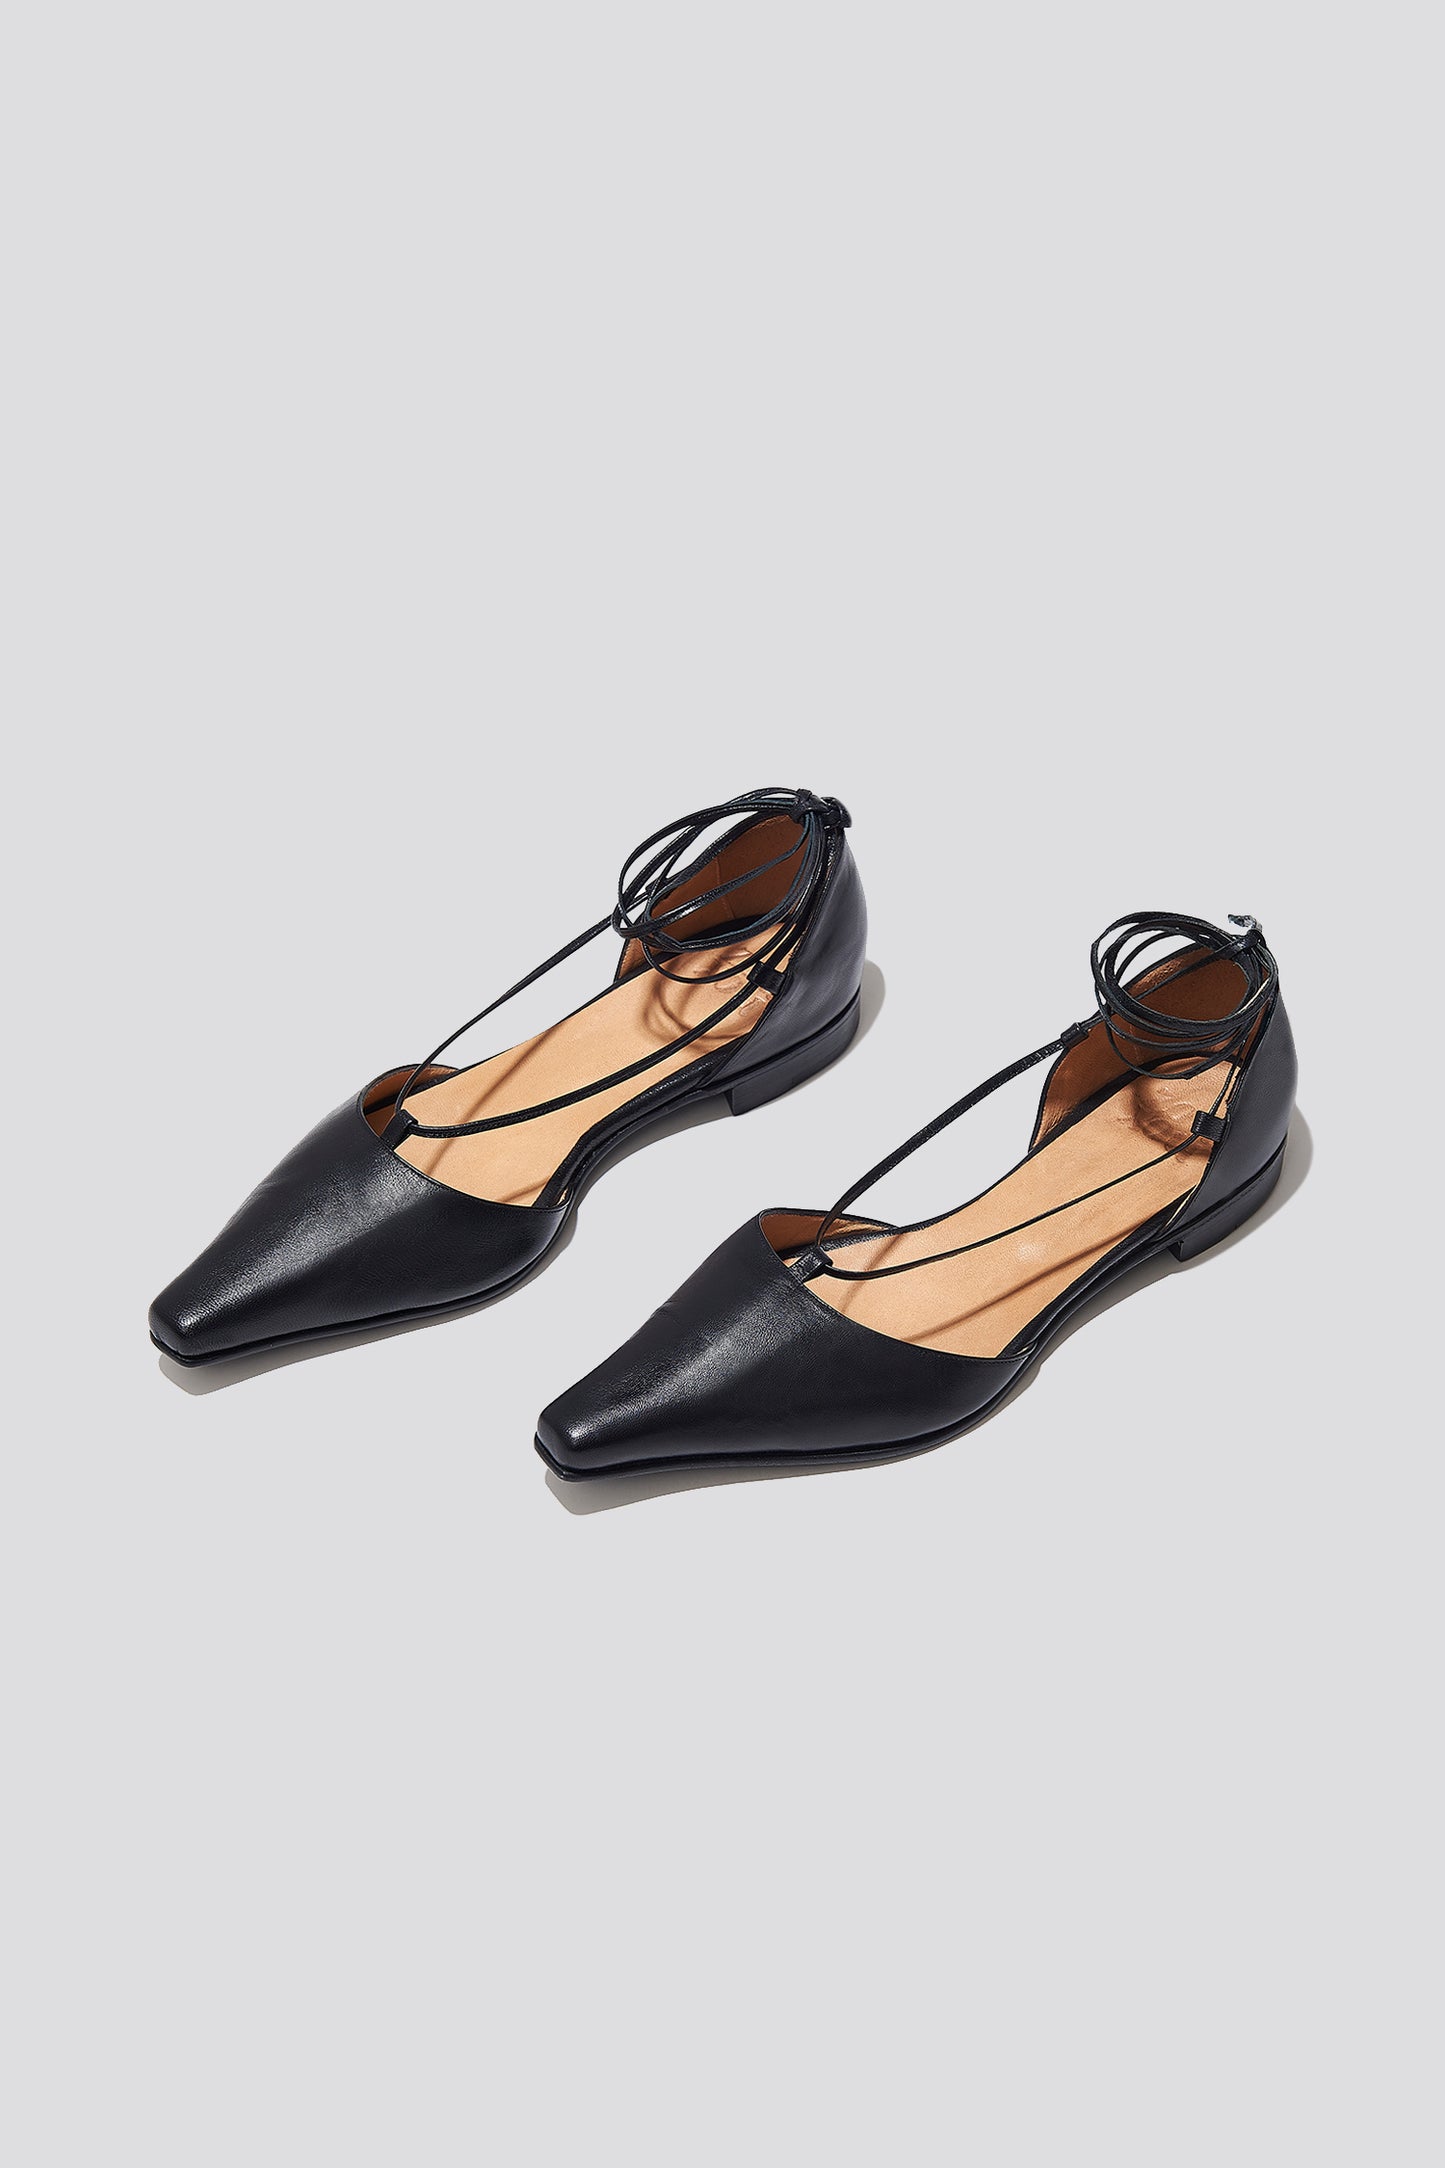 The Paloma Lace Up Flat in Black